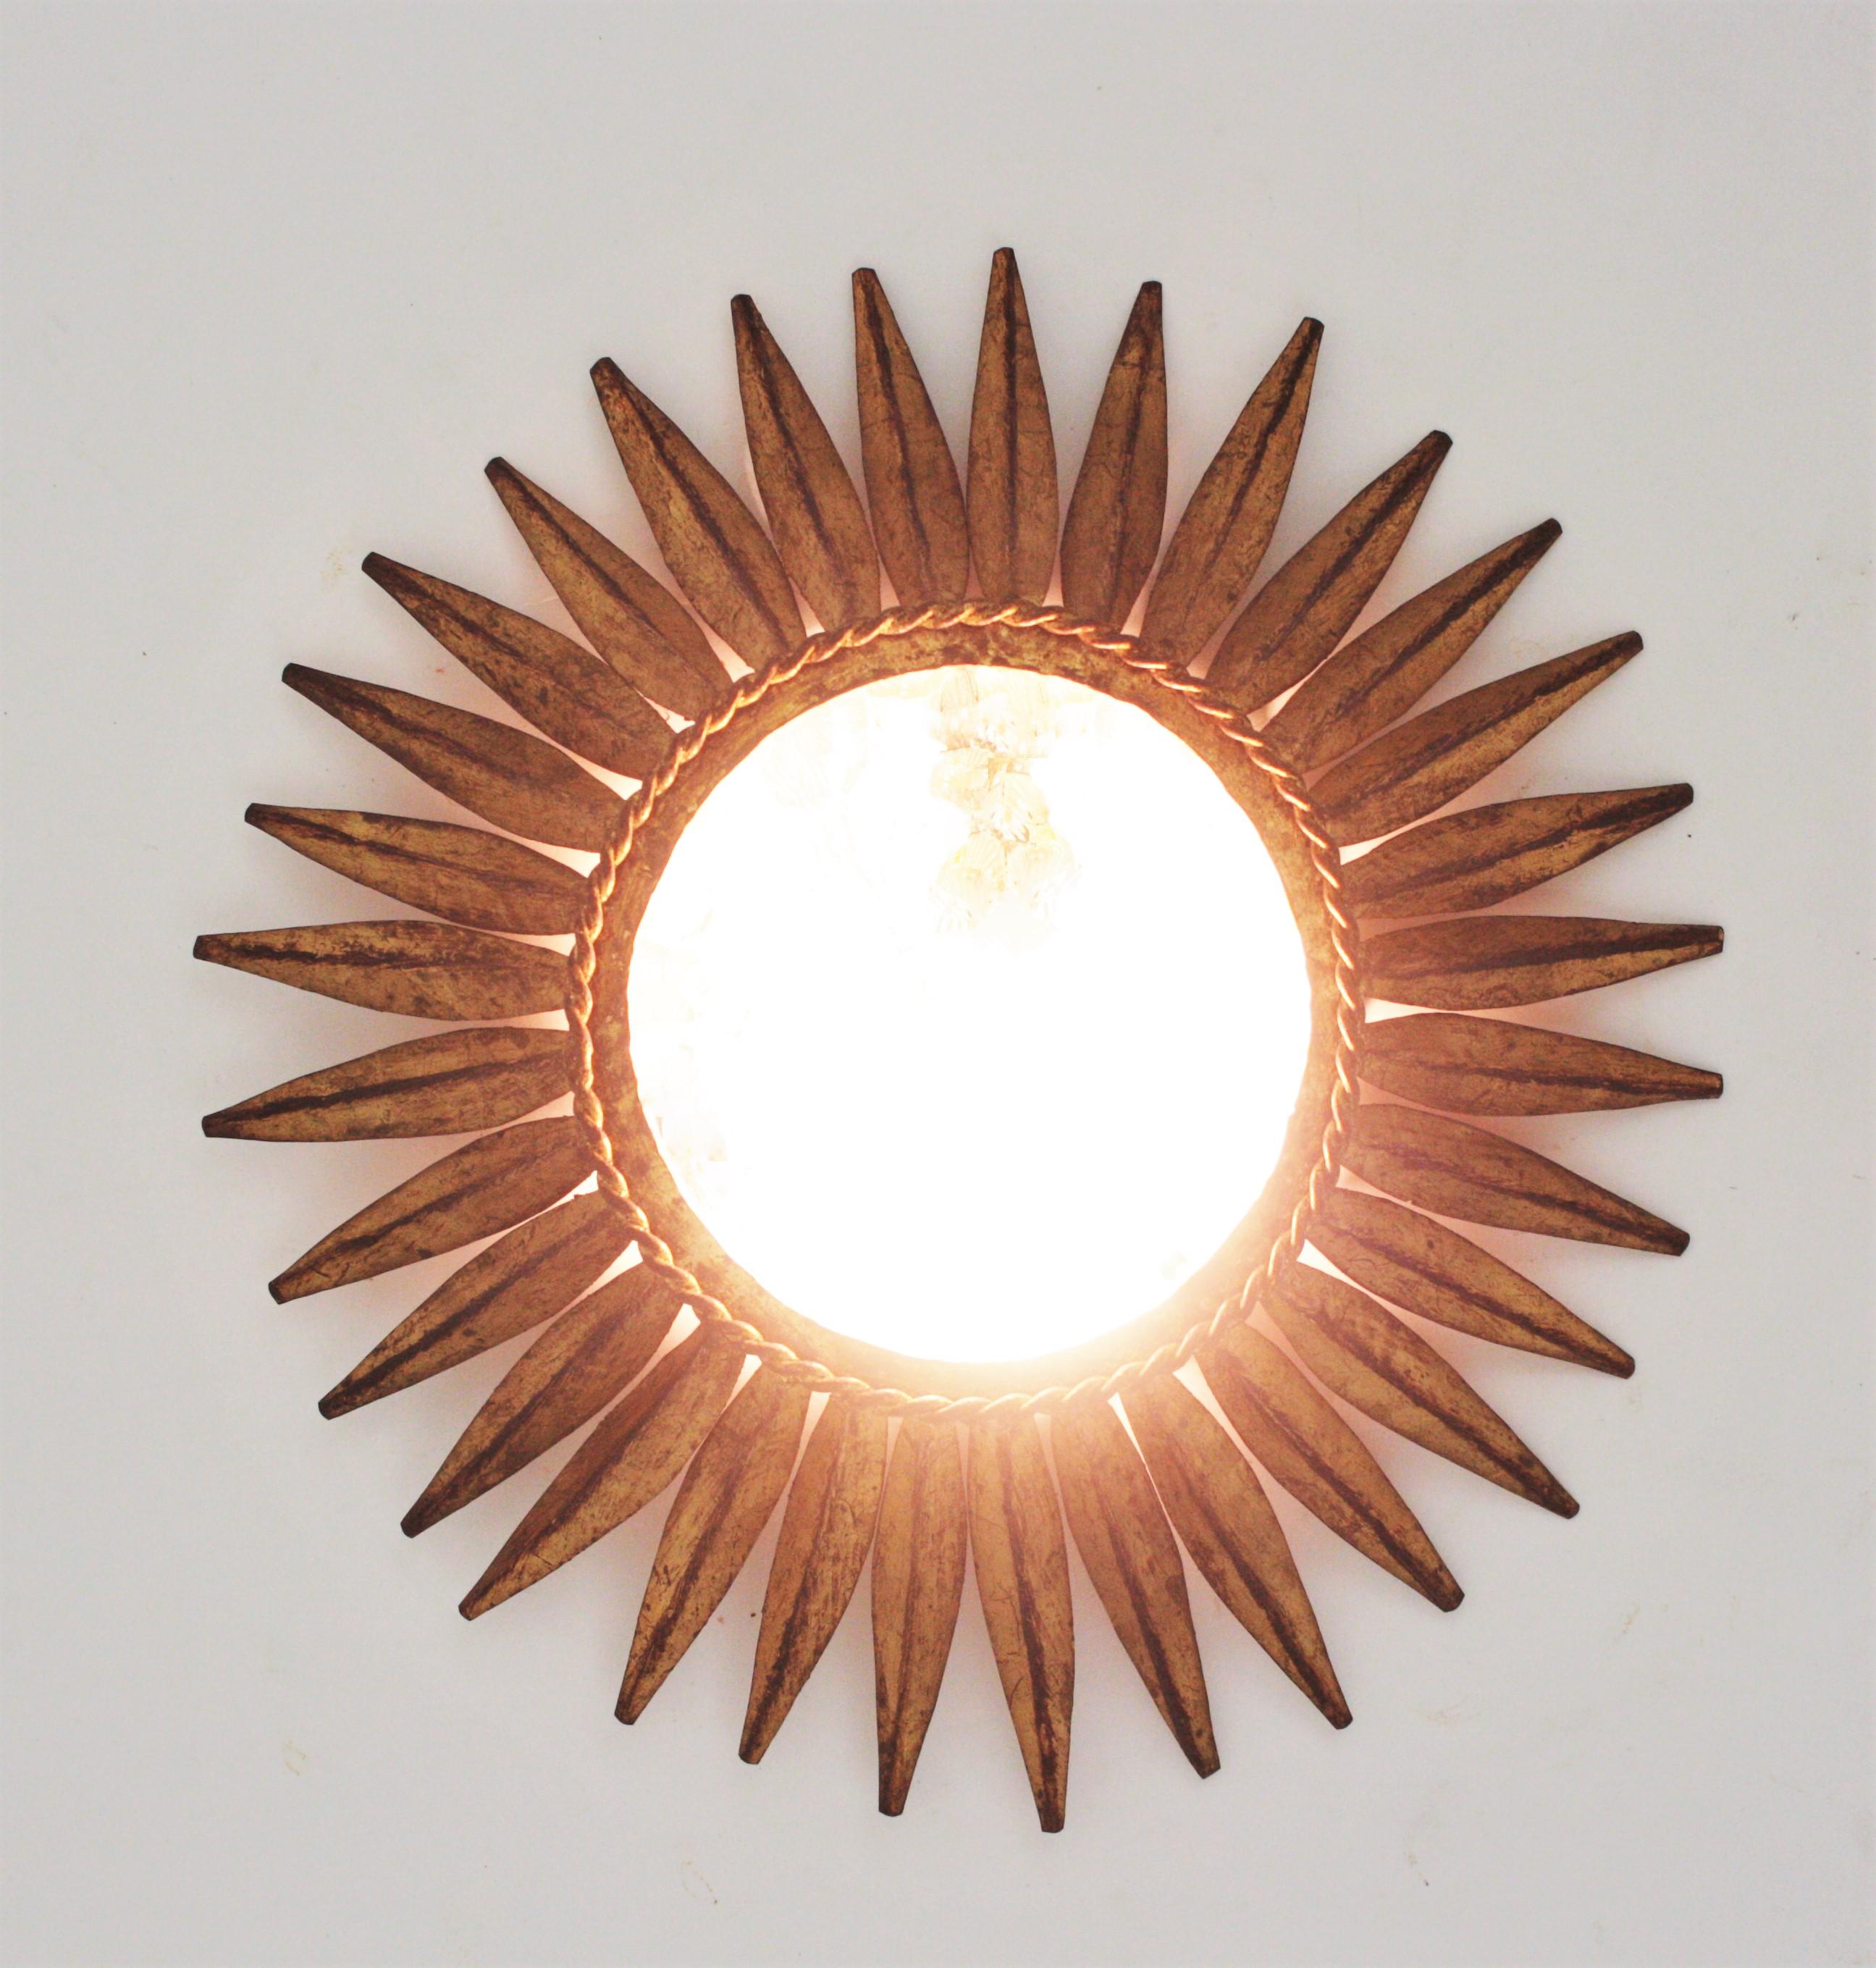 20th Century Spanish Sunburst Crown Ceiling Light Fixture, Gilt Iron and Textured Glass For Sale